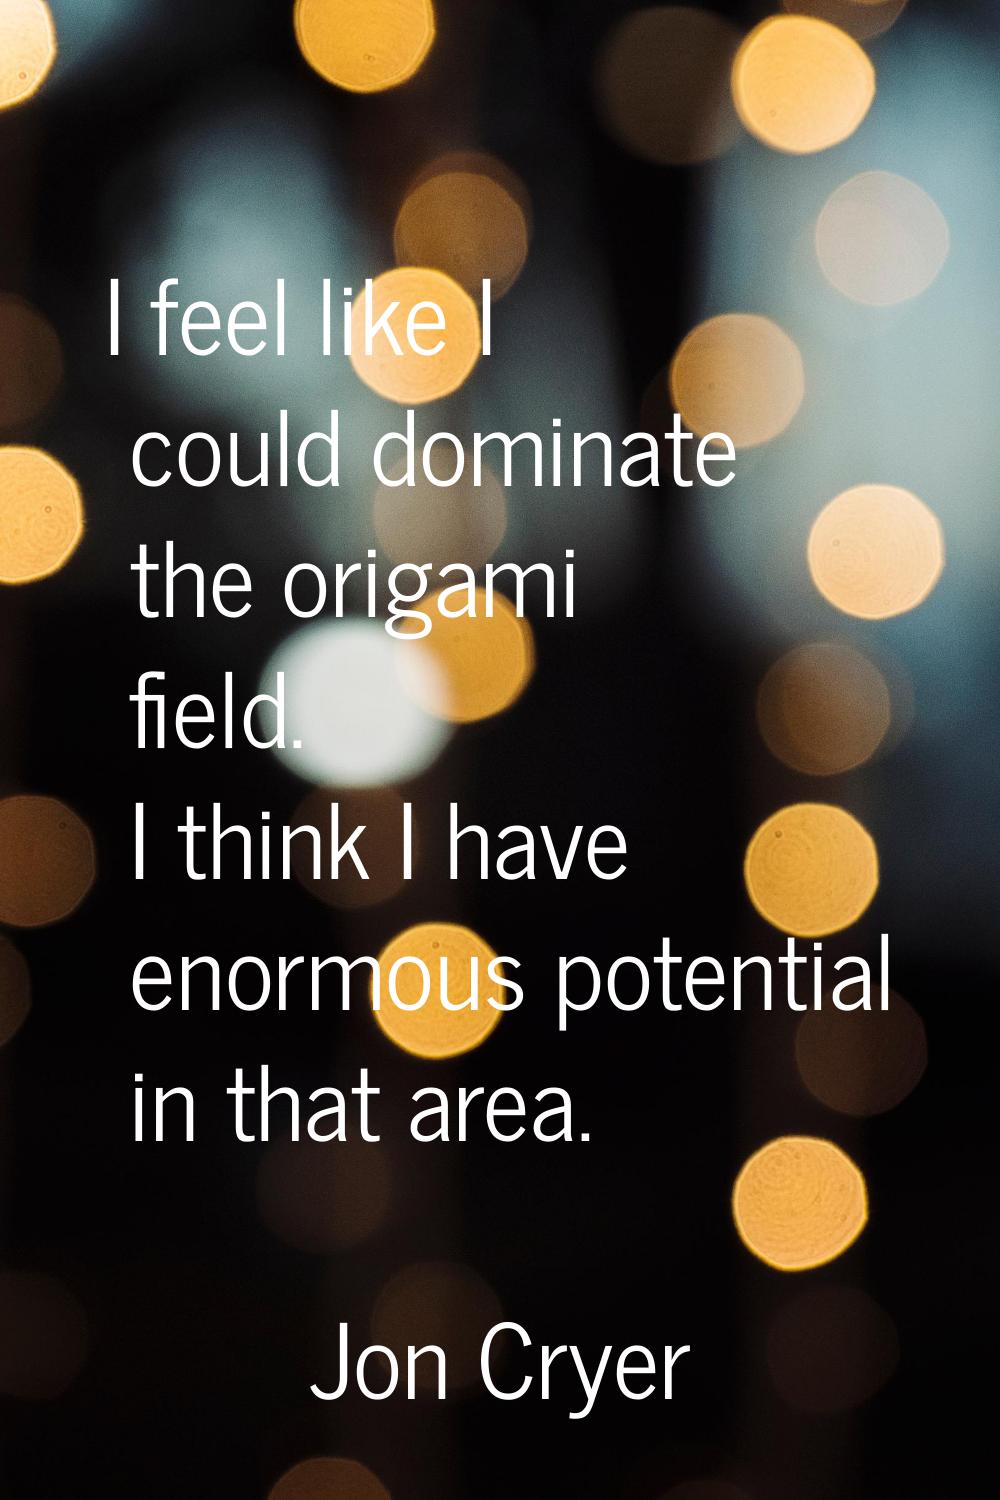 I feel like I could dominate the origami field. I think I have enormous potential in that area.